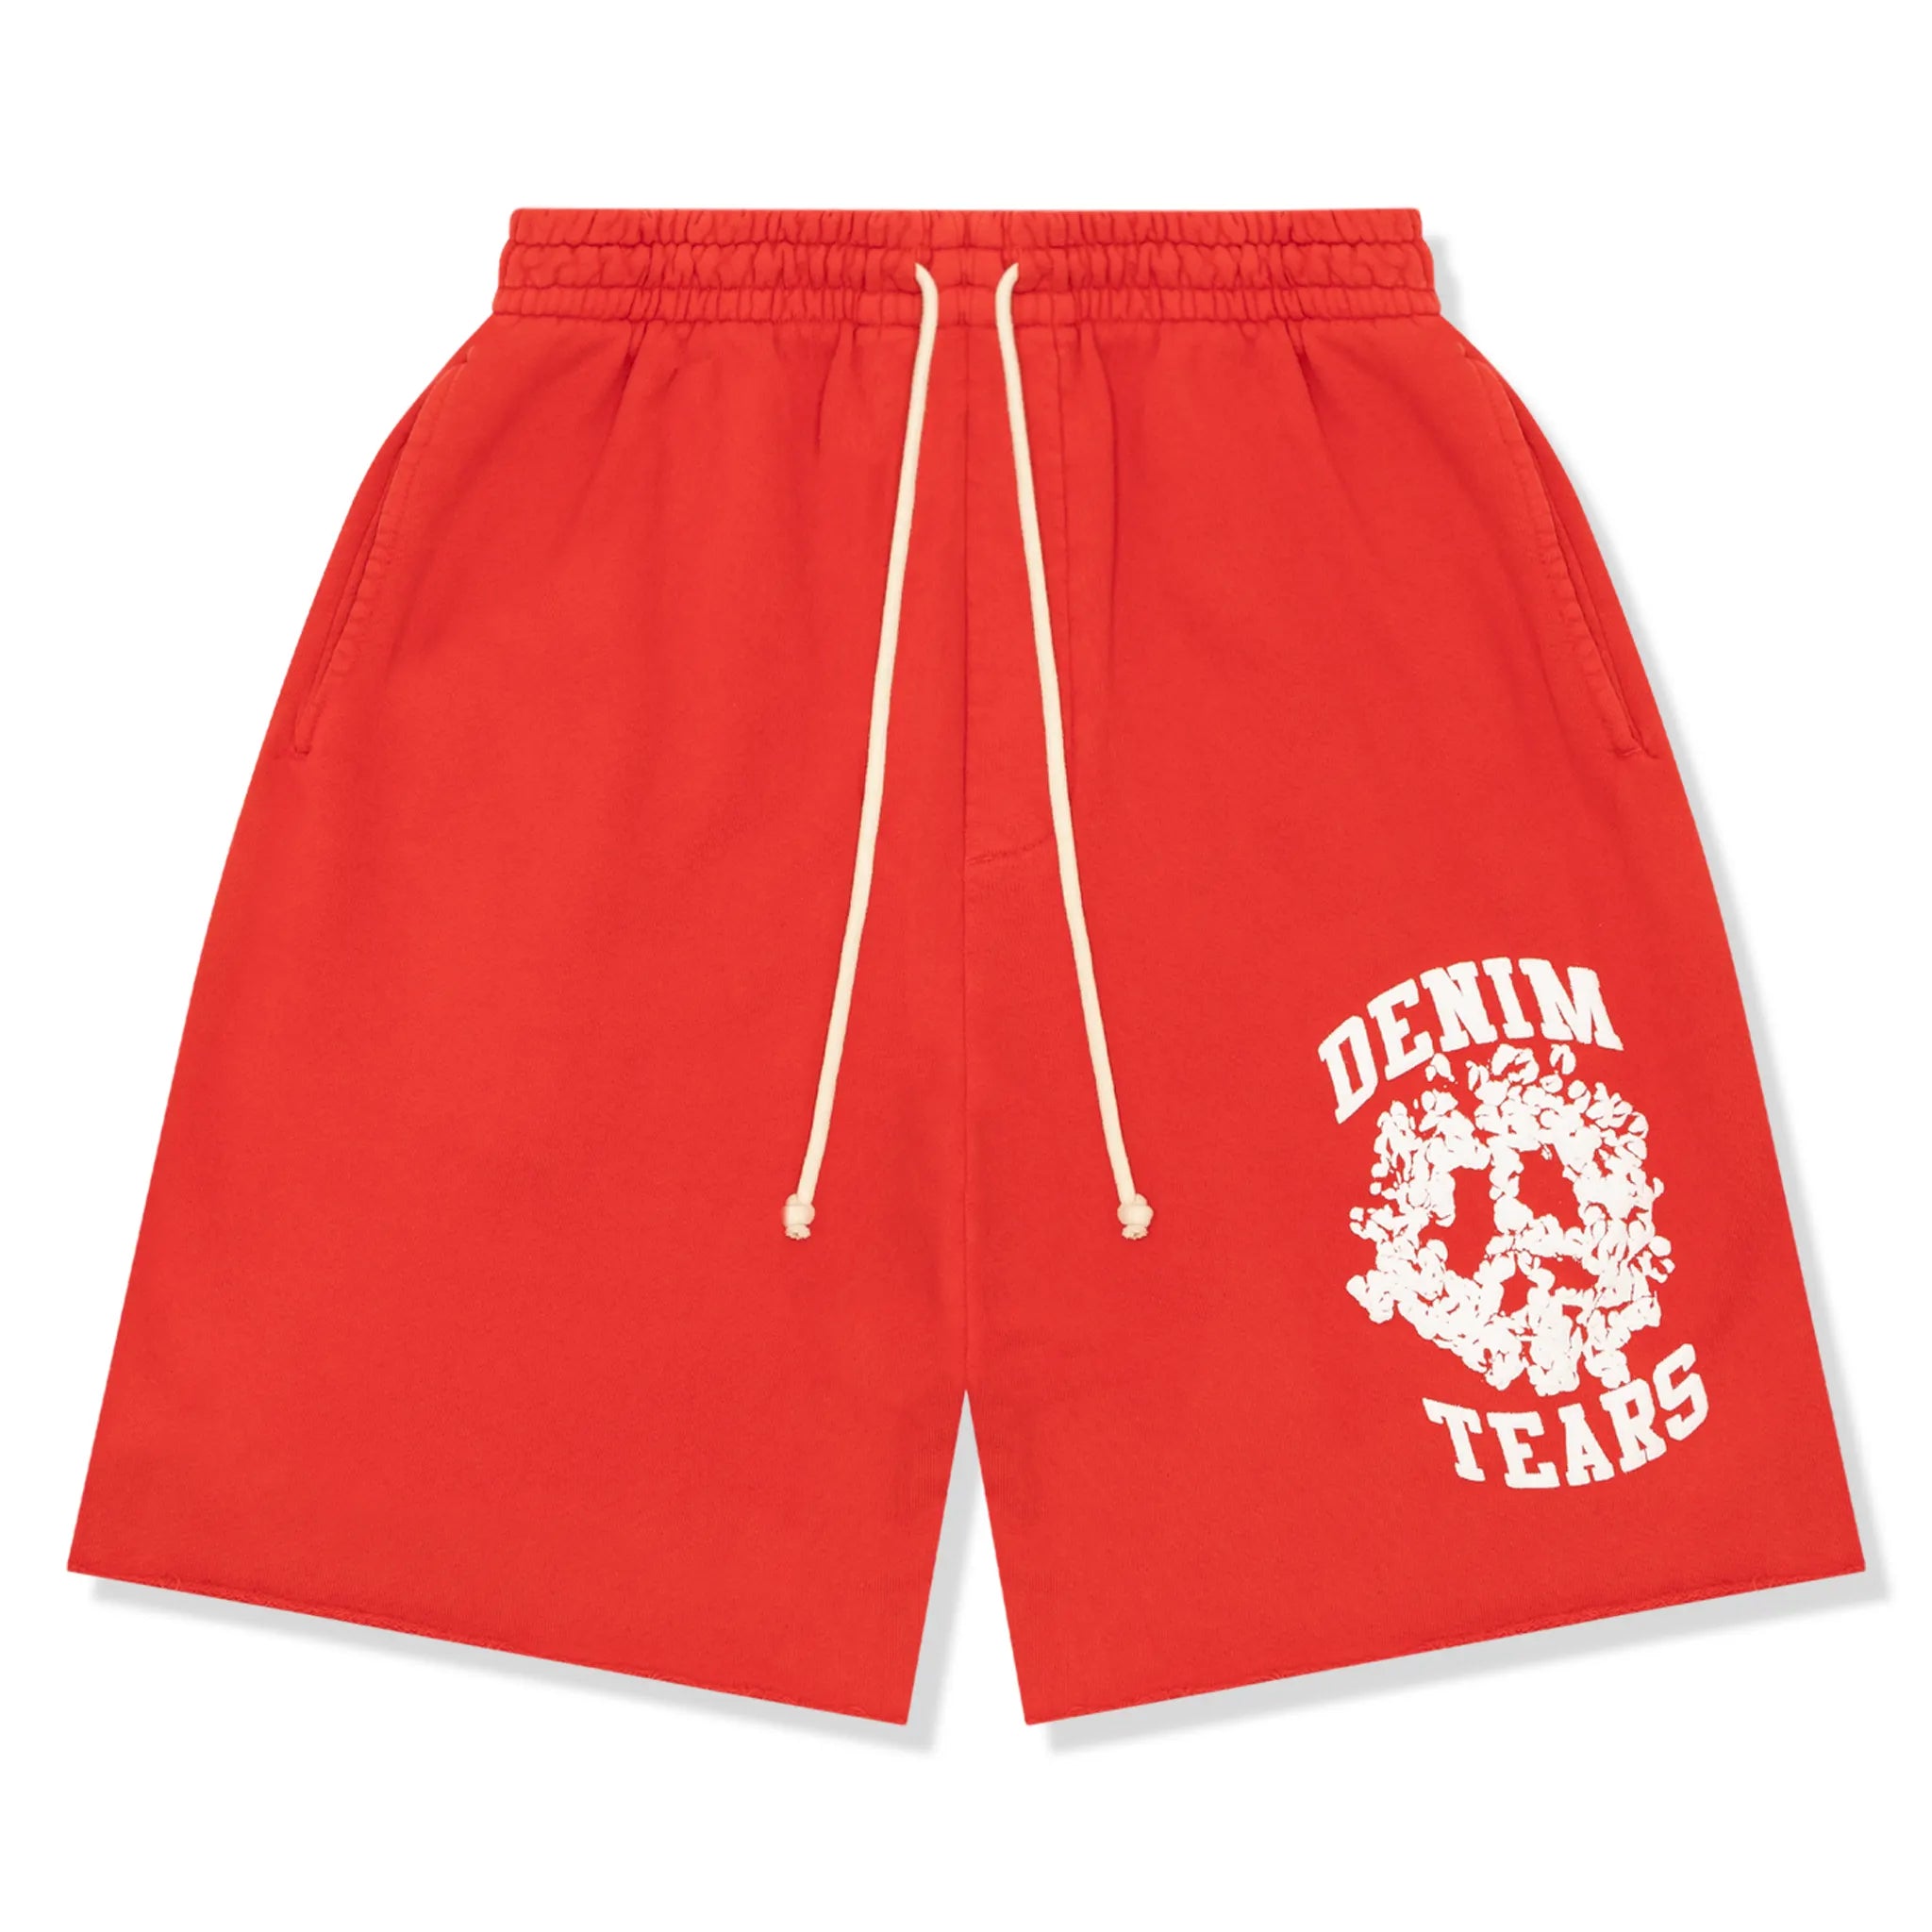 Front view of Denim Tears University Red Shorts 402-300-27